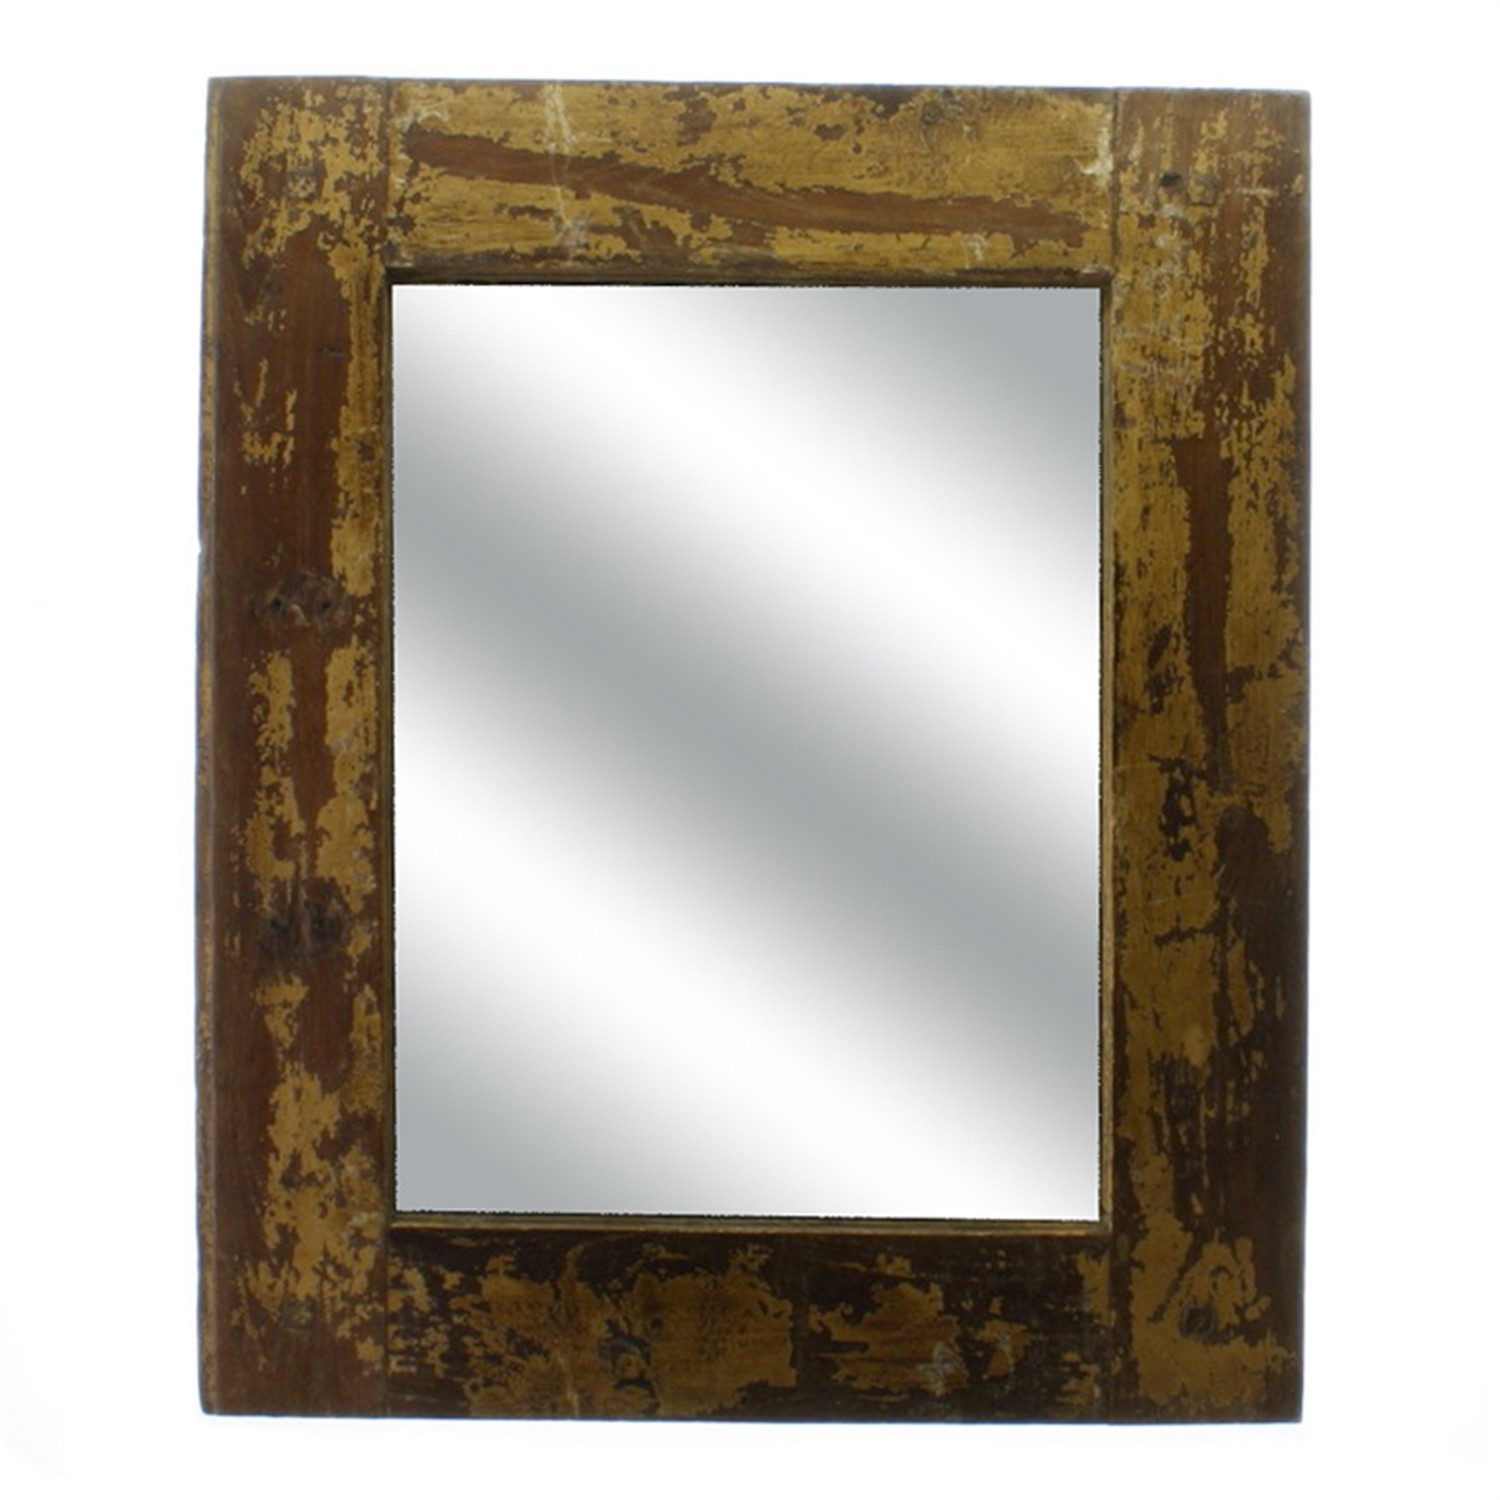 Reclaimed Wood Square Wall Mirror